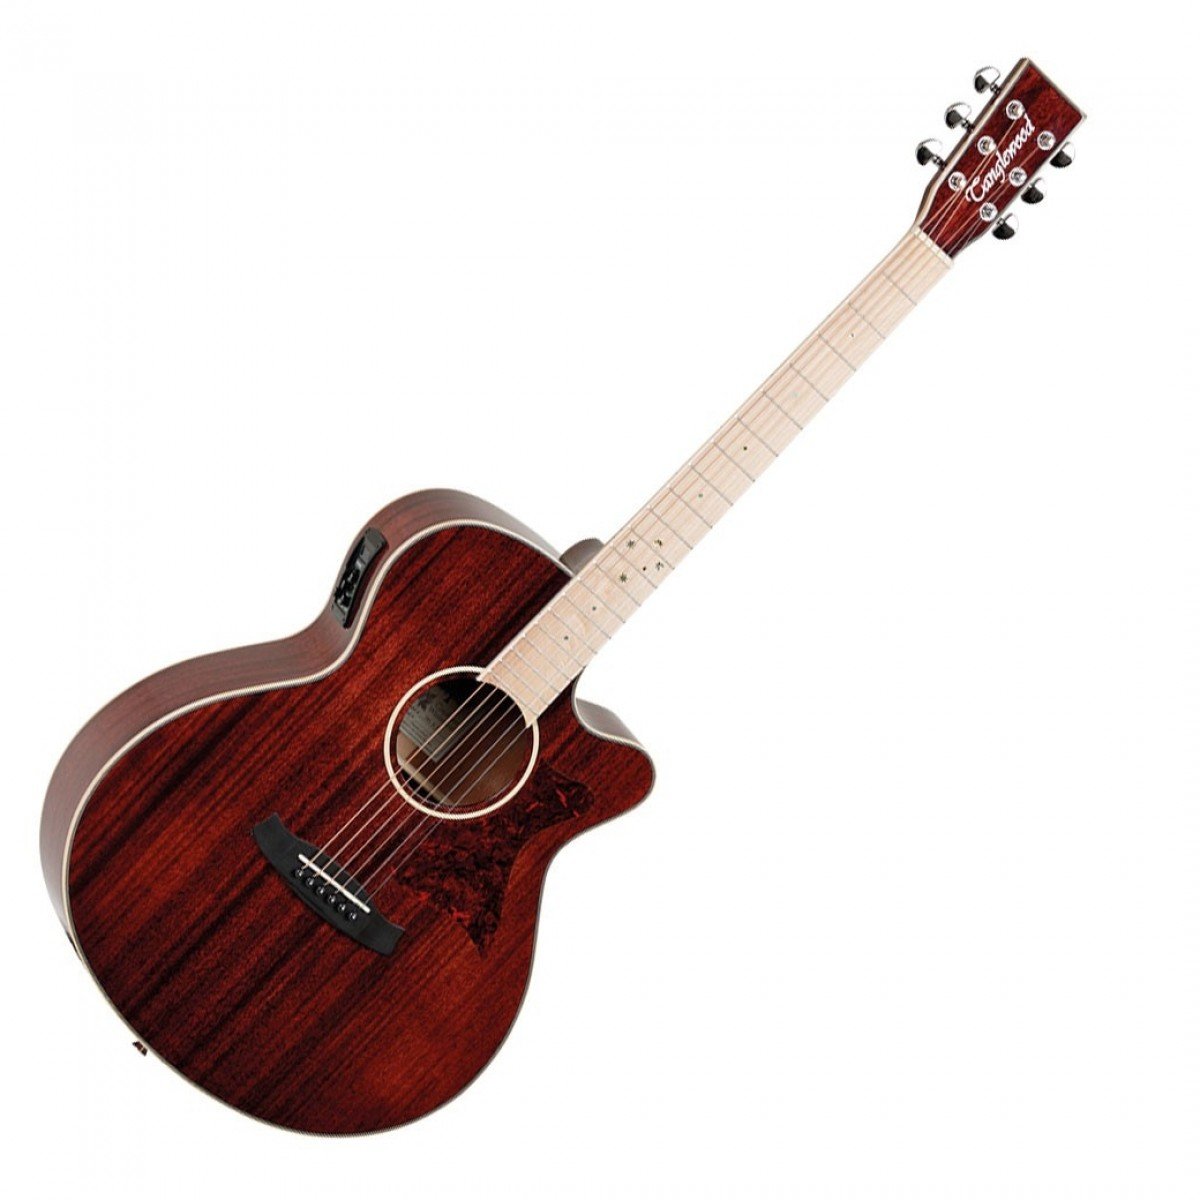 TANGLEWOOD TW4 E WINTERLEAF ELECTRO ACOUSTIC - BAROSSA RED GLOSS